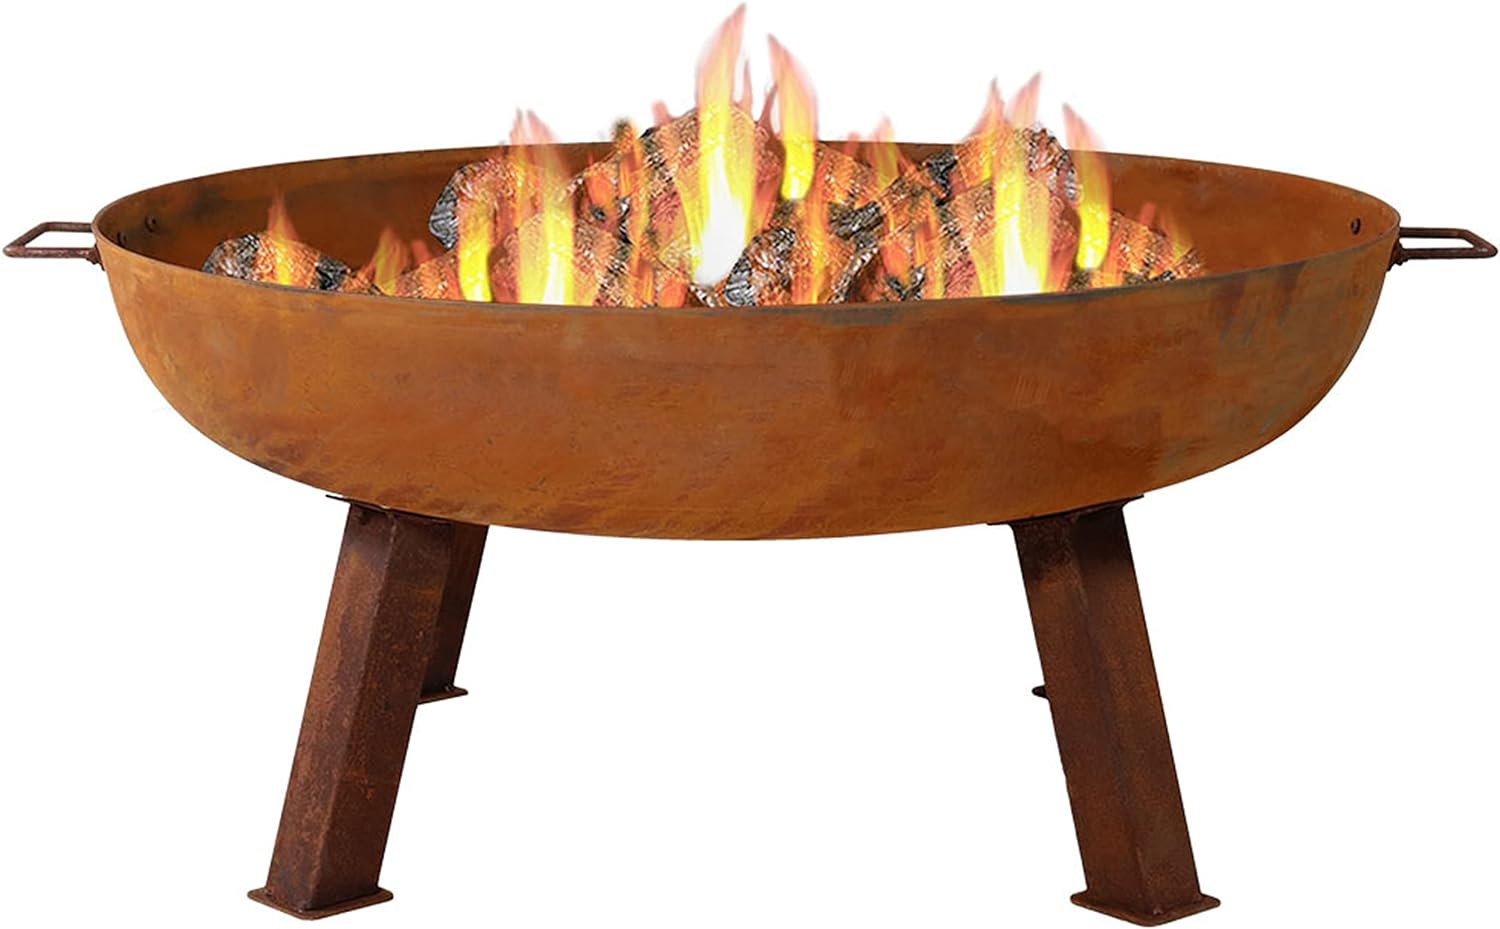 Sunnydaze 34-Inch Rustic Cast Iron Outdoor Raised Fire Pit Bowl with Handles - Oxidized Finish